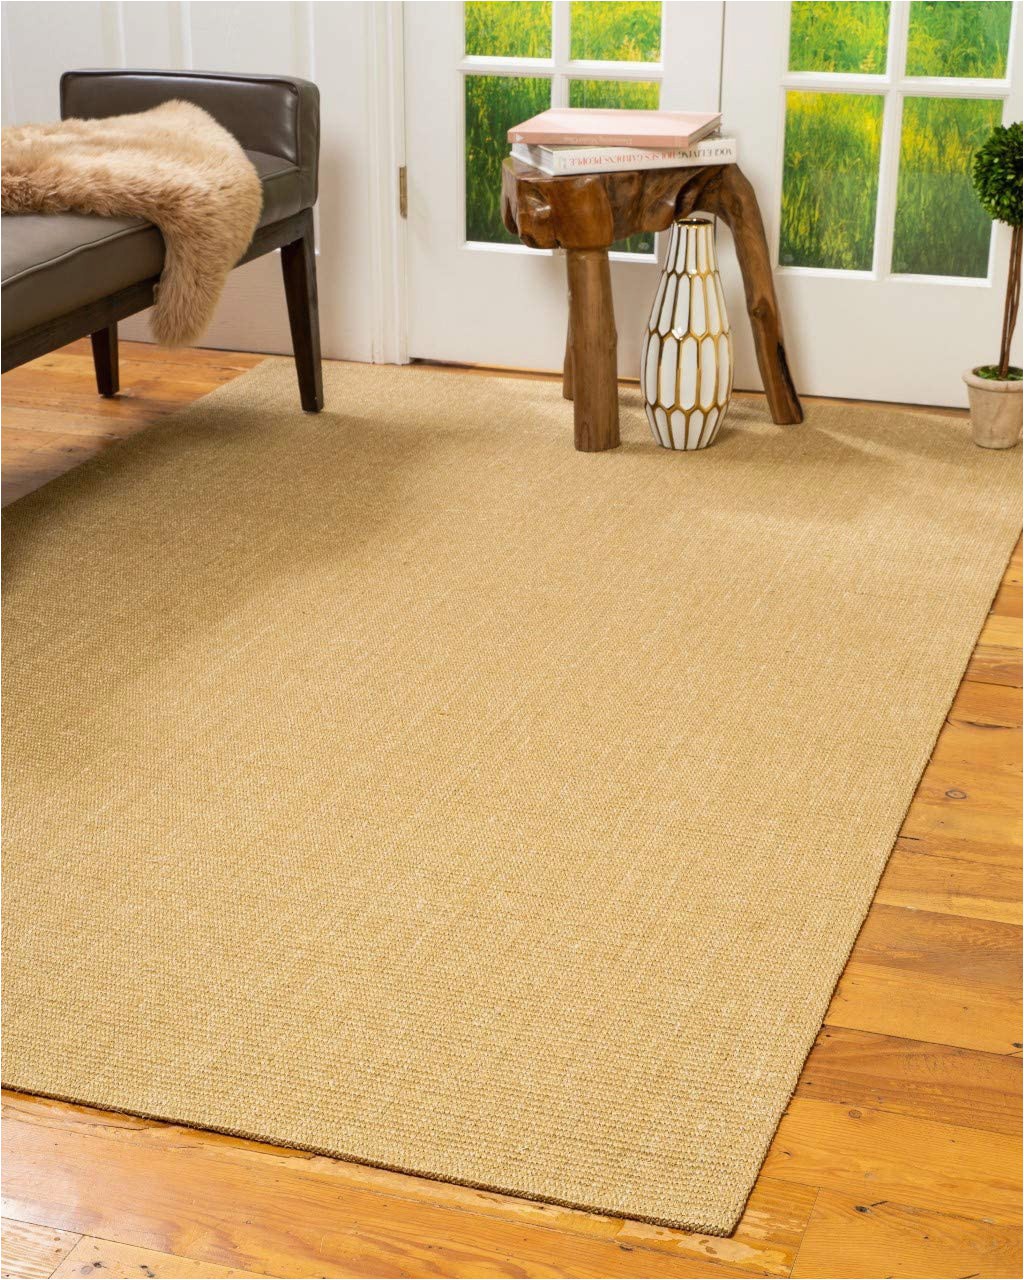 8 X 10 Natural Fiber area Rugs Natural area Rugs Sisal Rug Tribeca Collection Earth Friendly Natural Fiber Sisal Rug Beige 6 X 9